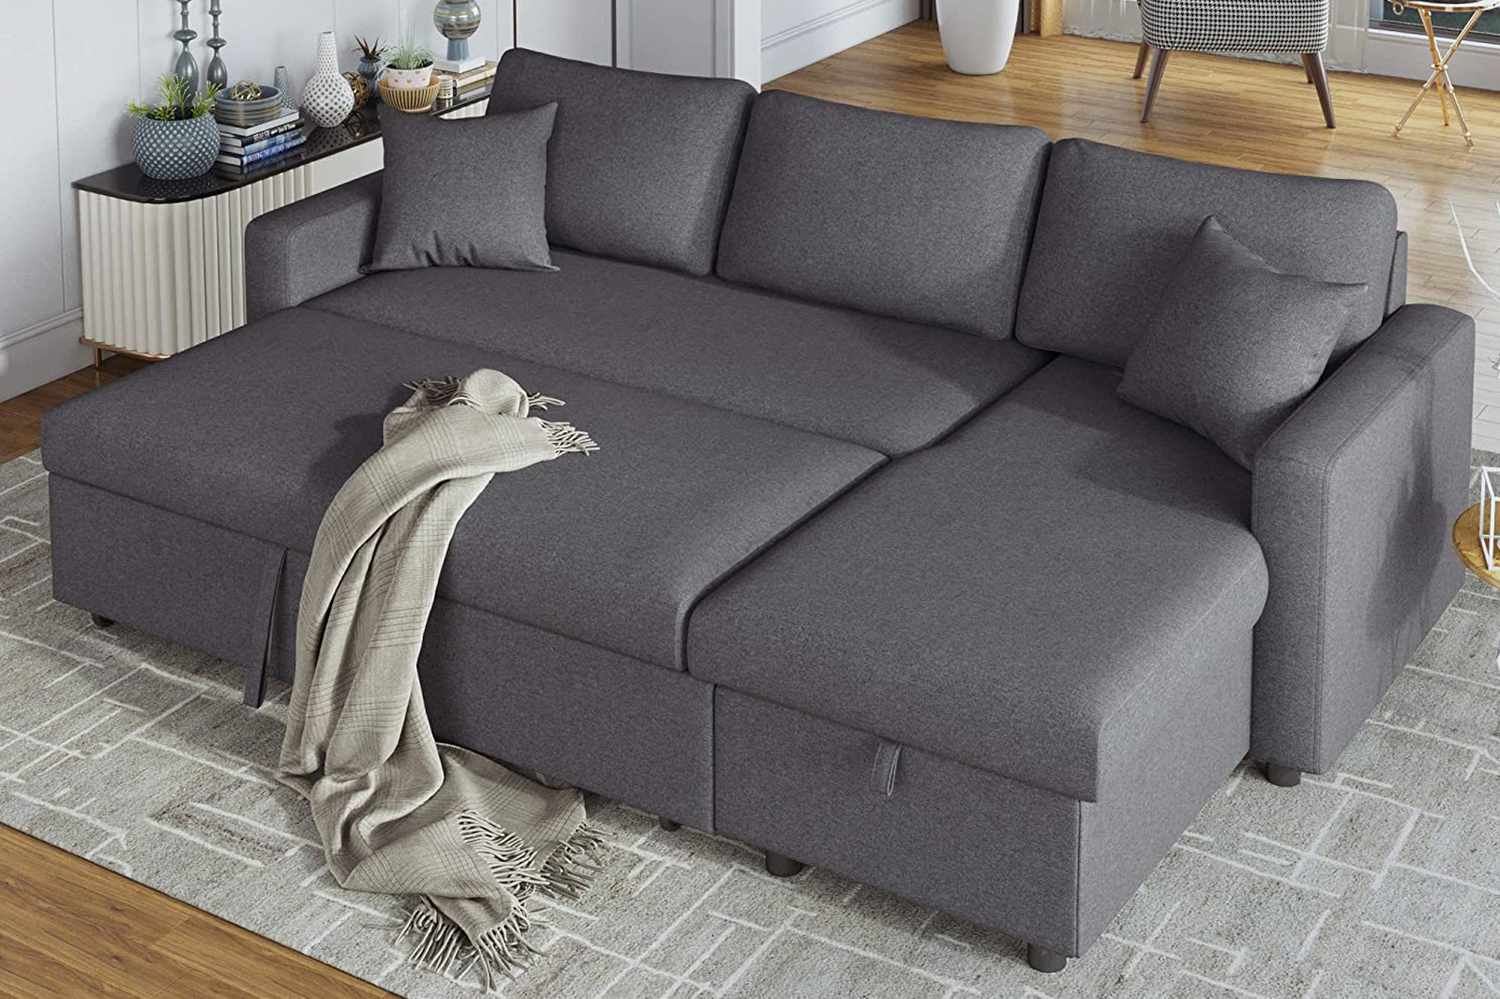 gray sectional storage couch